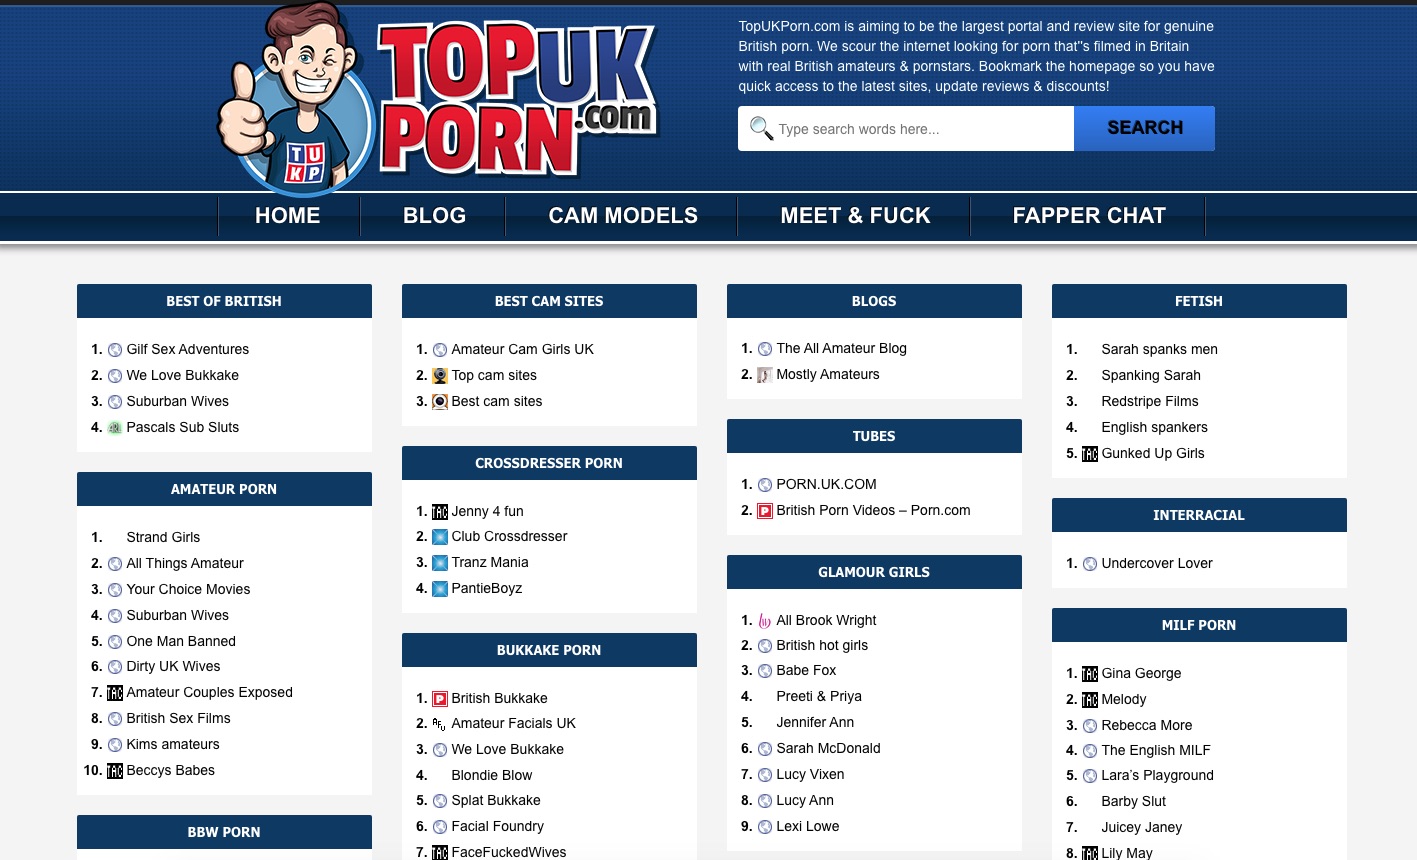 Find the best British porn sites at TopUKPorn pic